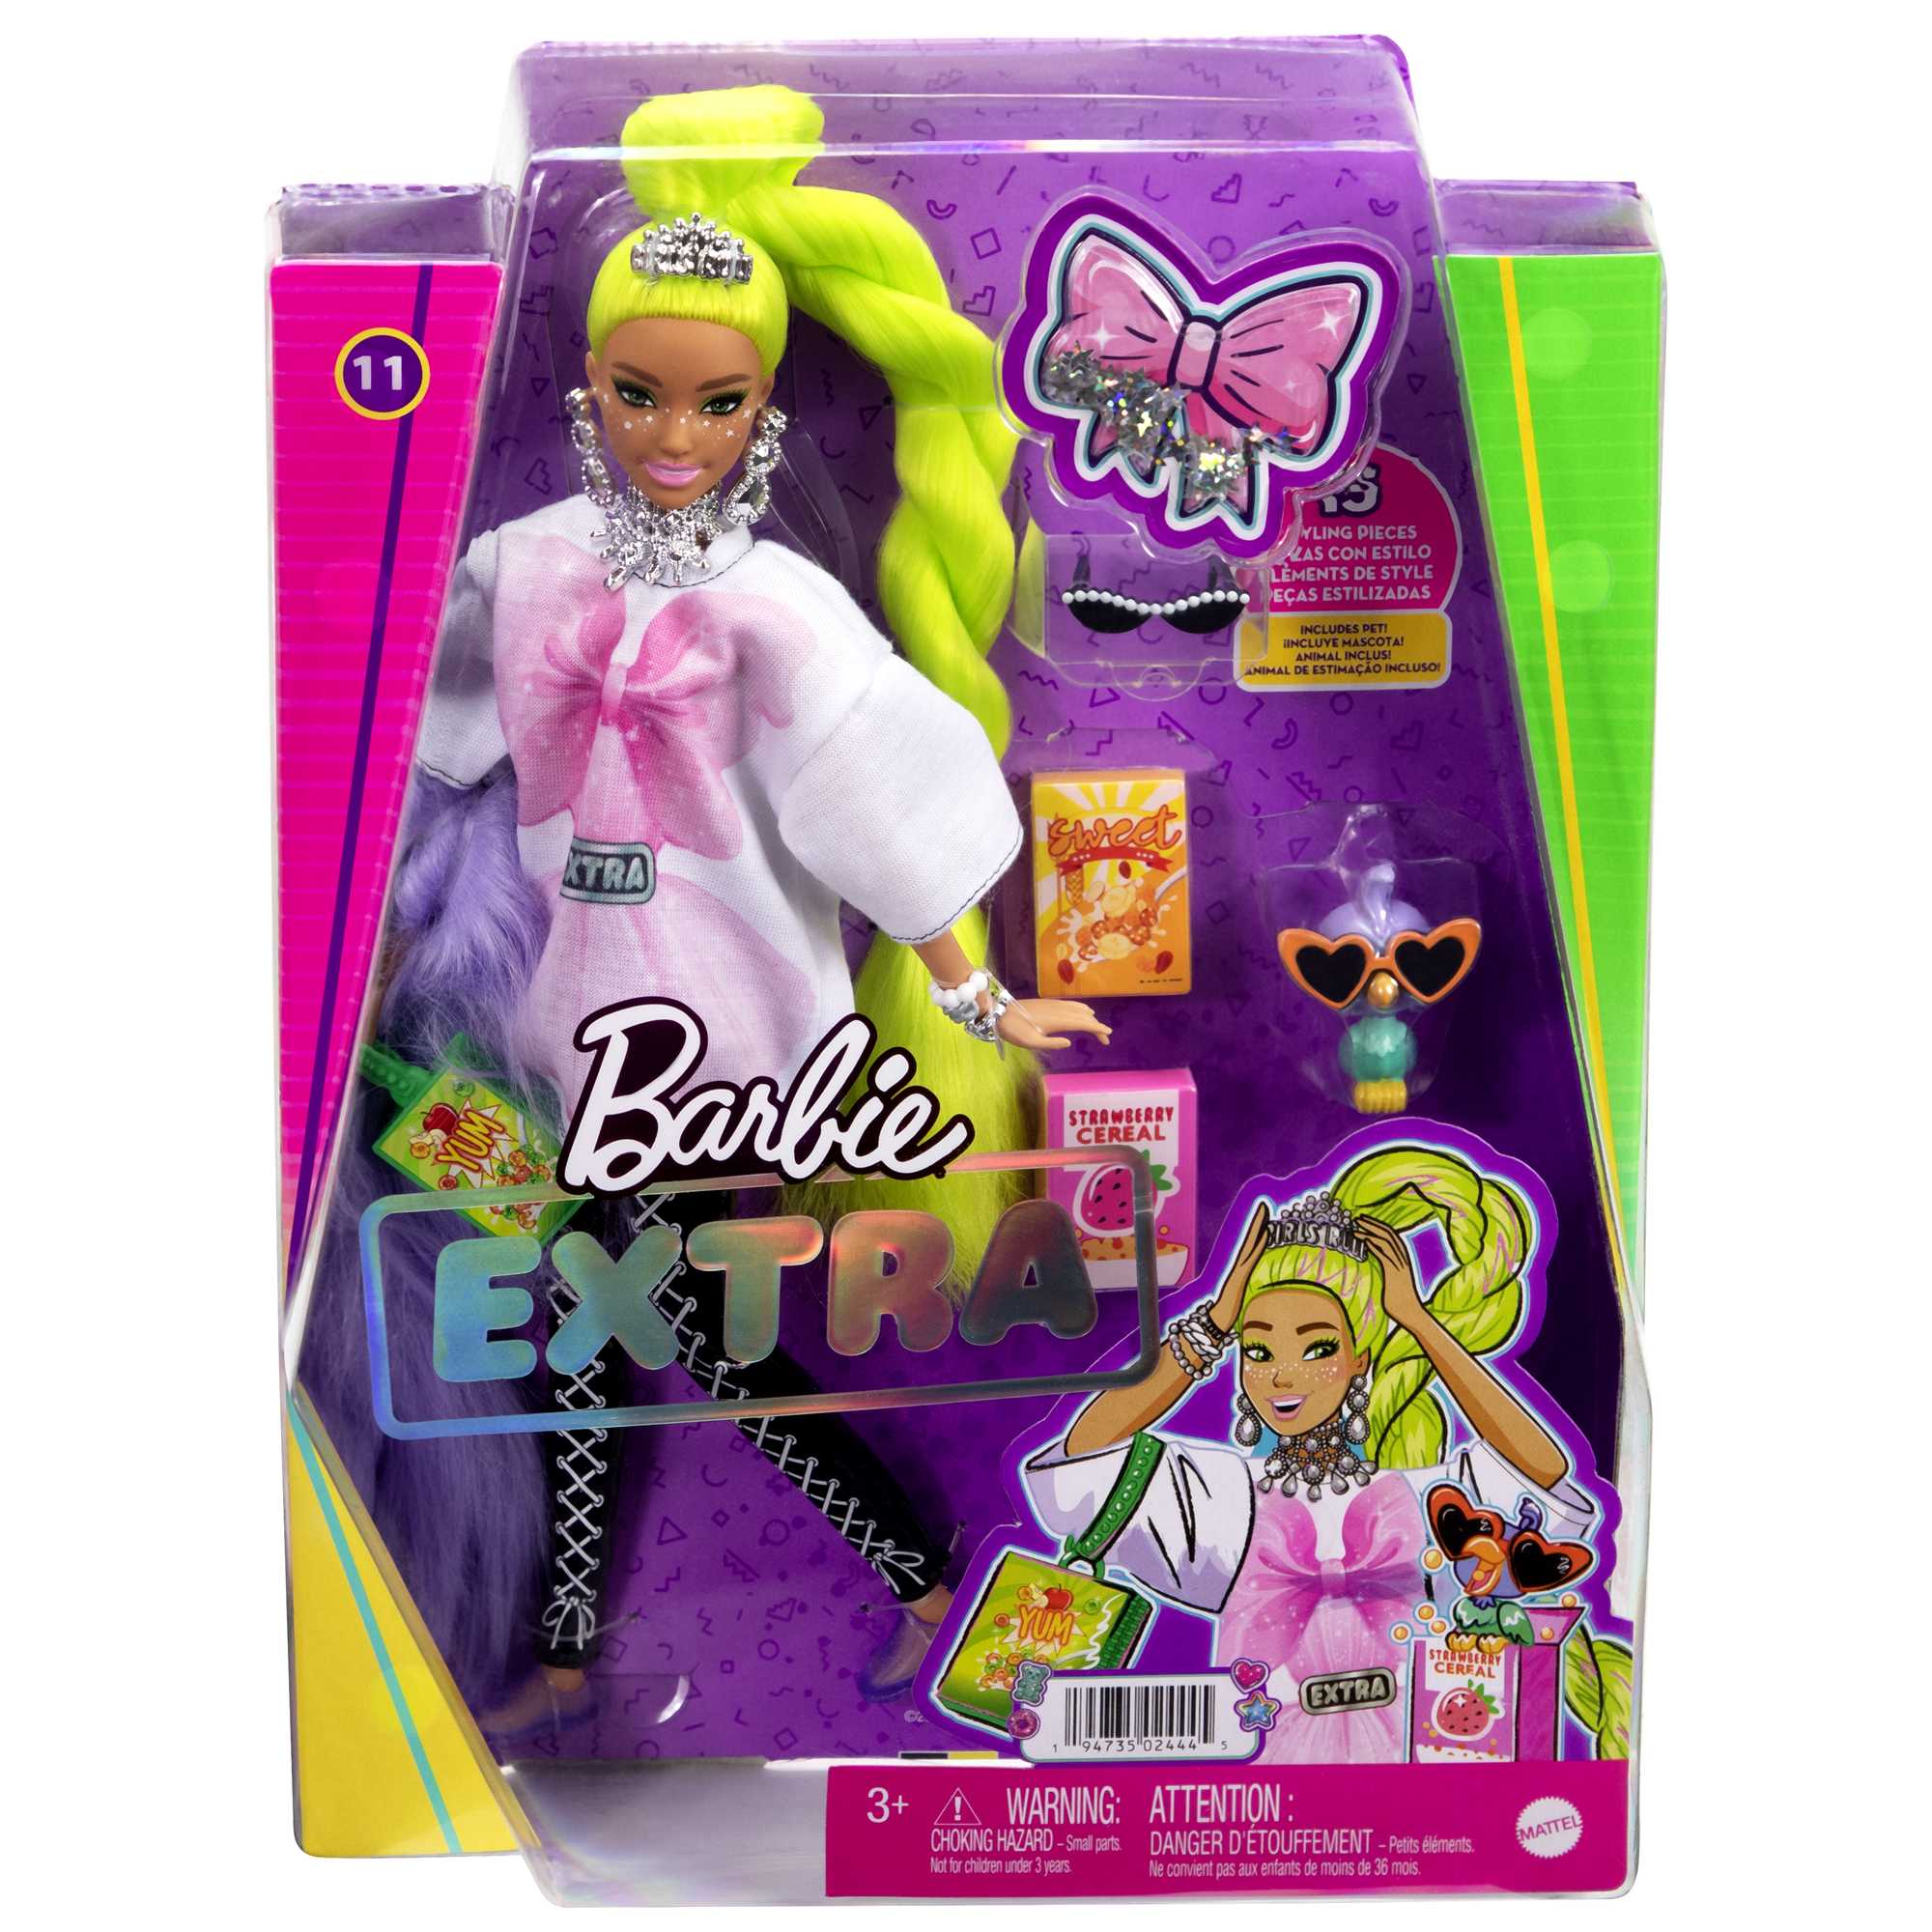 Barbie Extra Doll And Pet - HDJ45 - The Toy Box Hanover